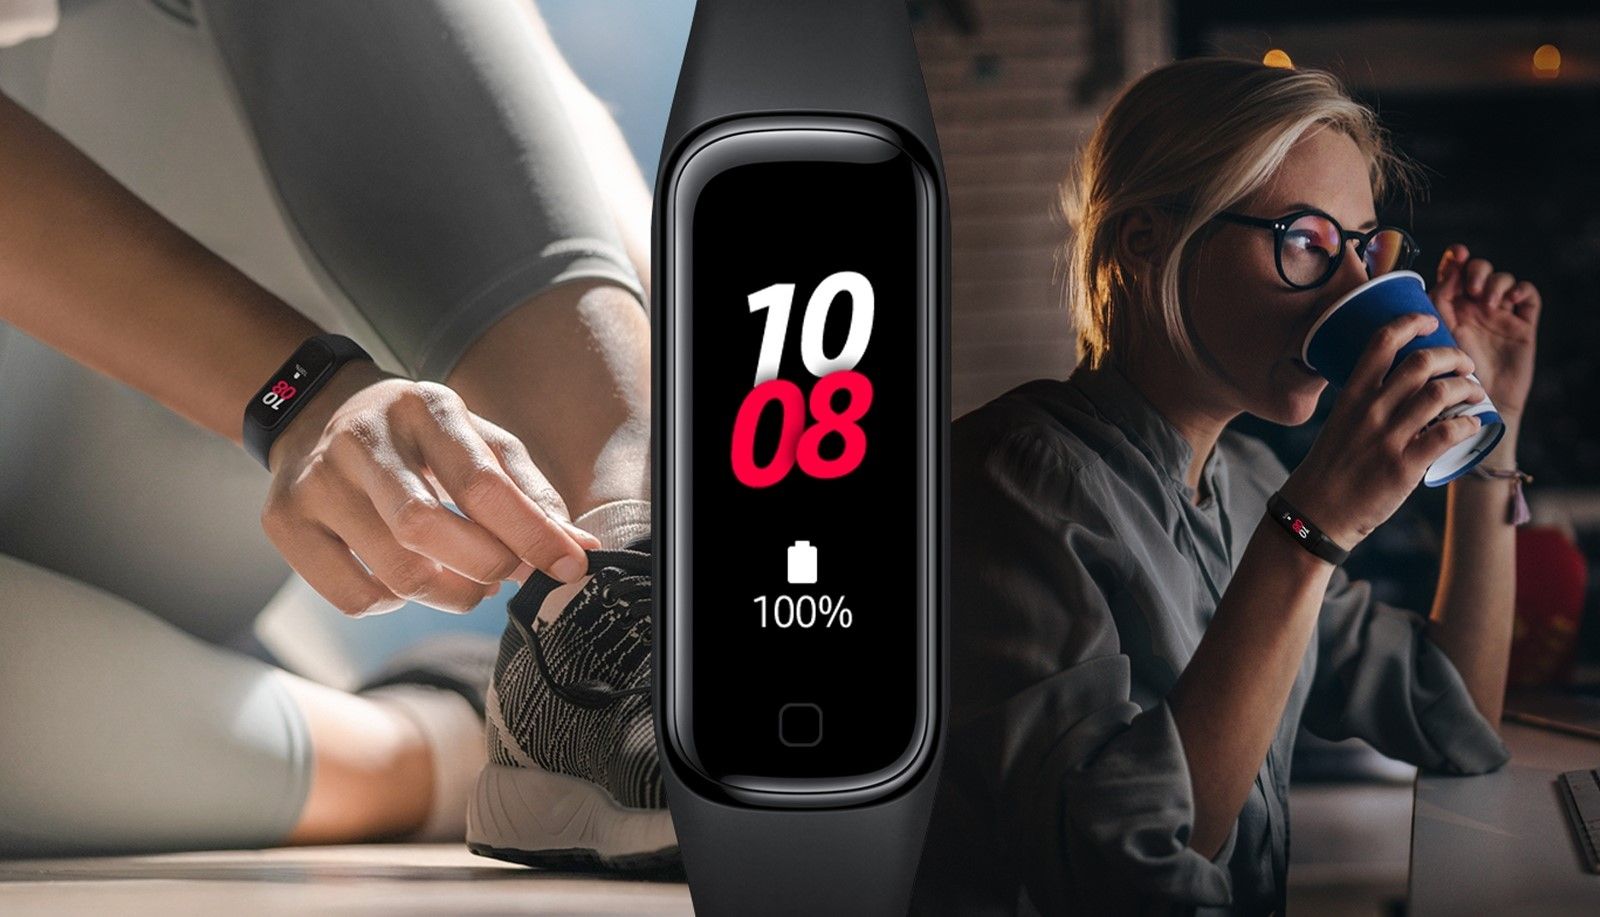 The Galaxy Fit 2 front and center, with two images of a runner and a worker drinking coffee behind them.